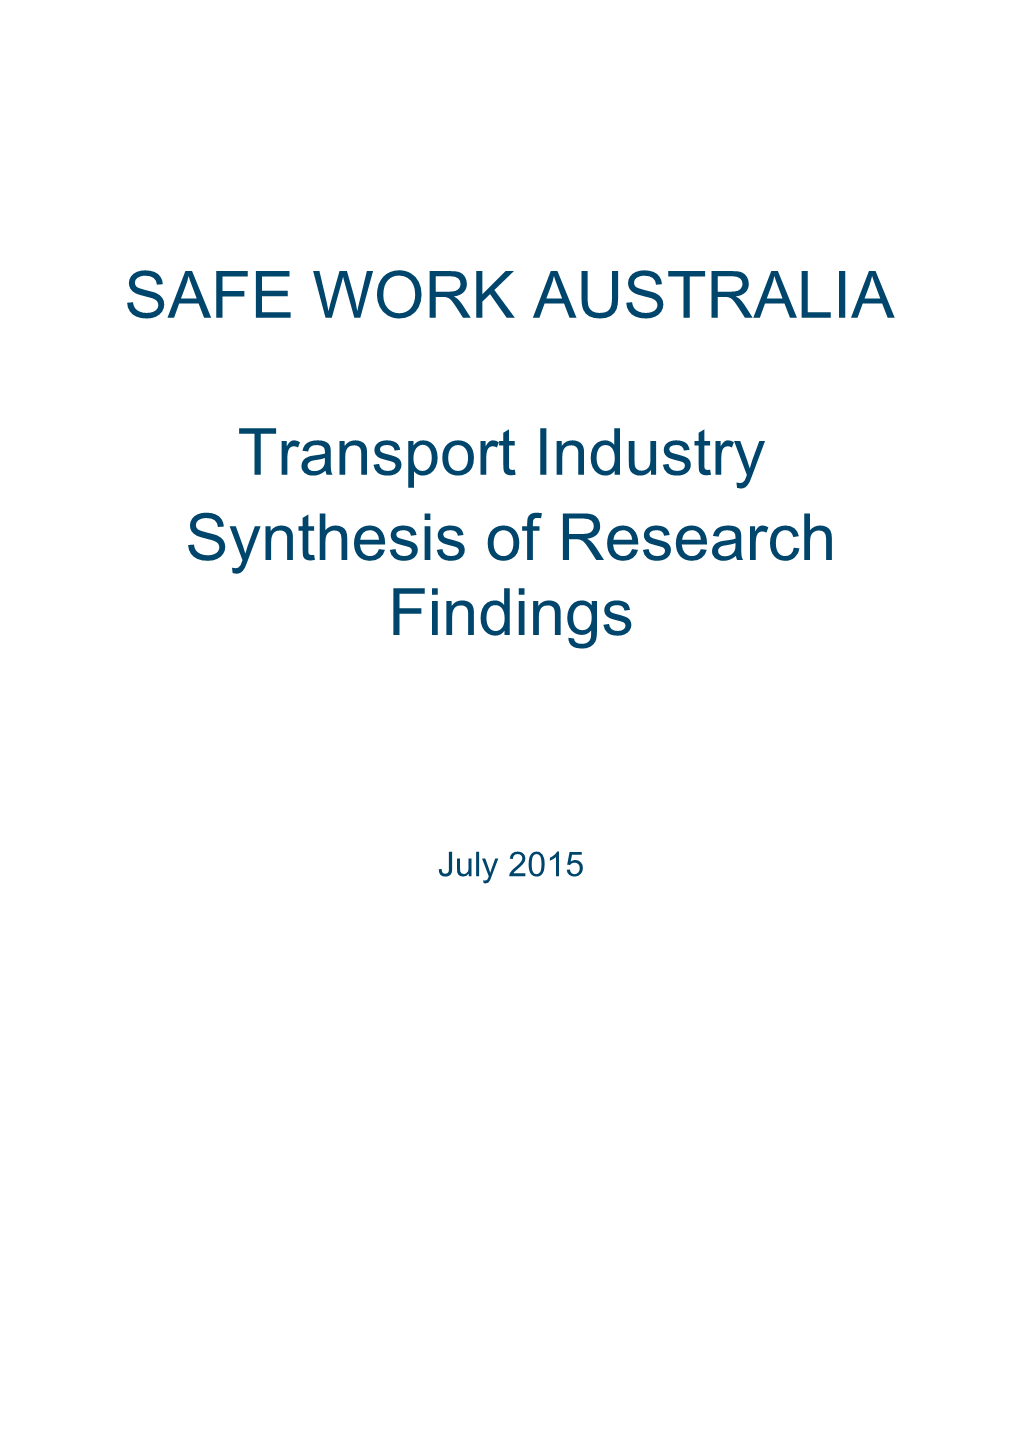 Tansport Industry: Synthesis of Research Findings